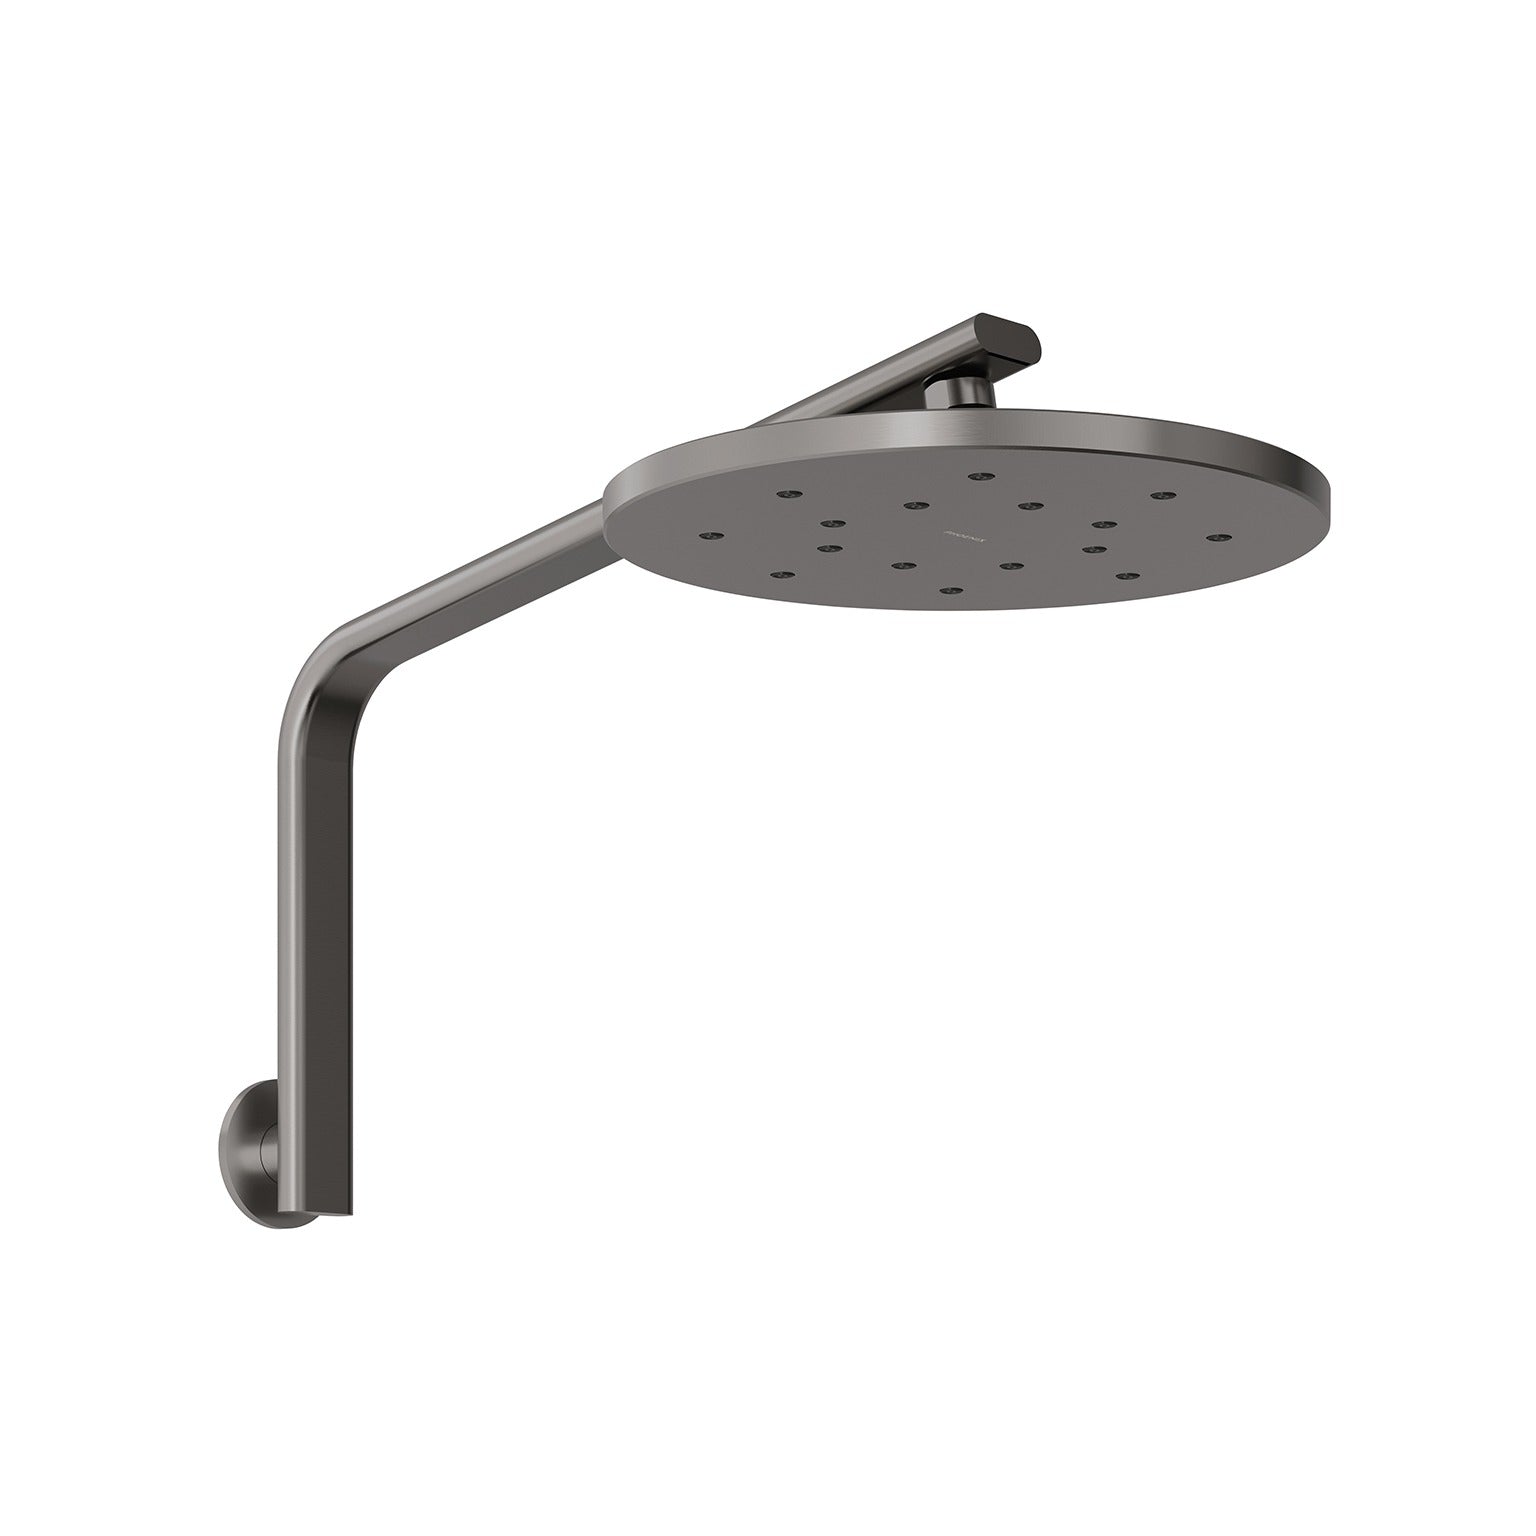 PHOENIX OXLEY HIGH-RISE SHOWER ARM AND ROSE BRUSHED CARBON